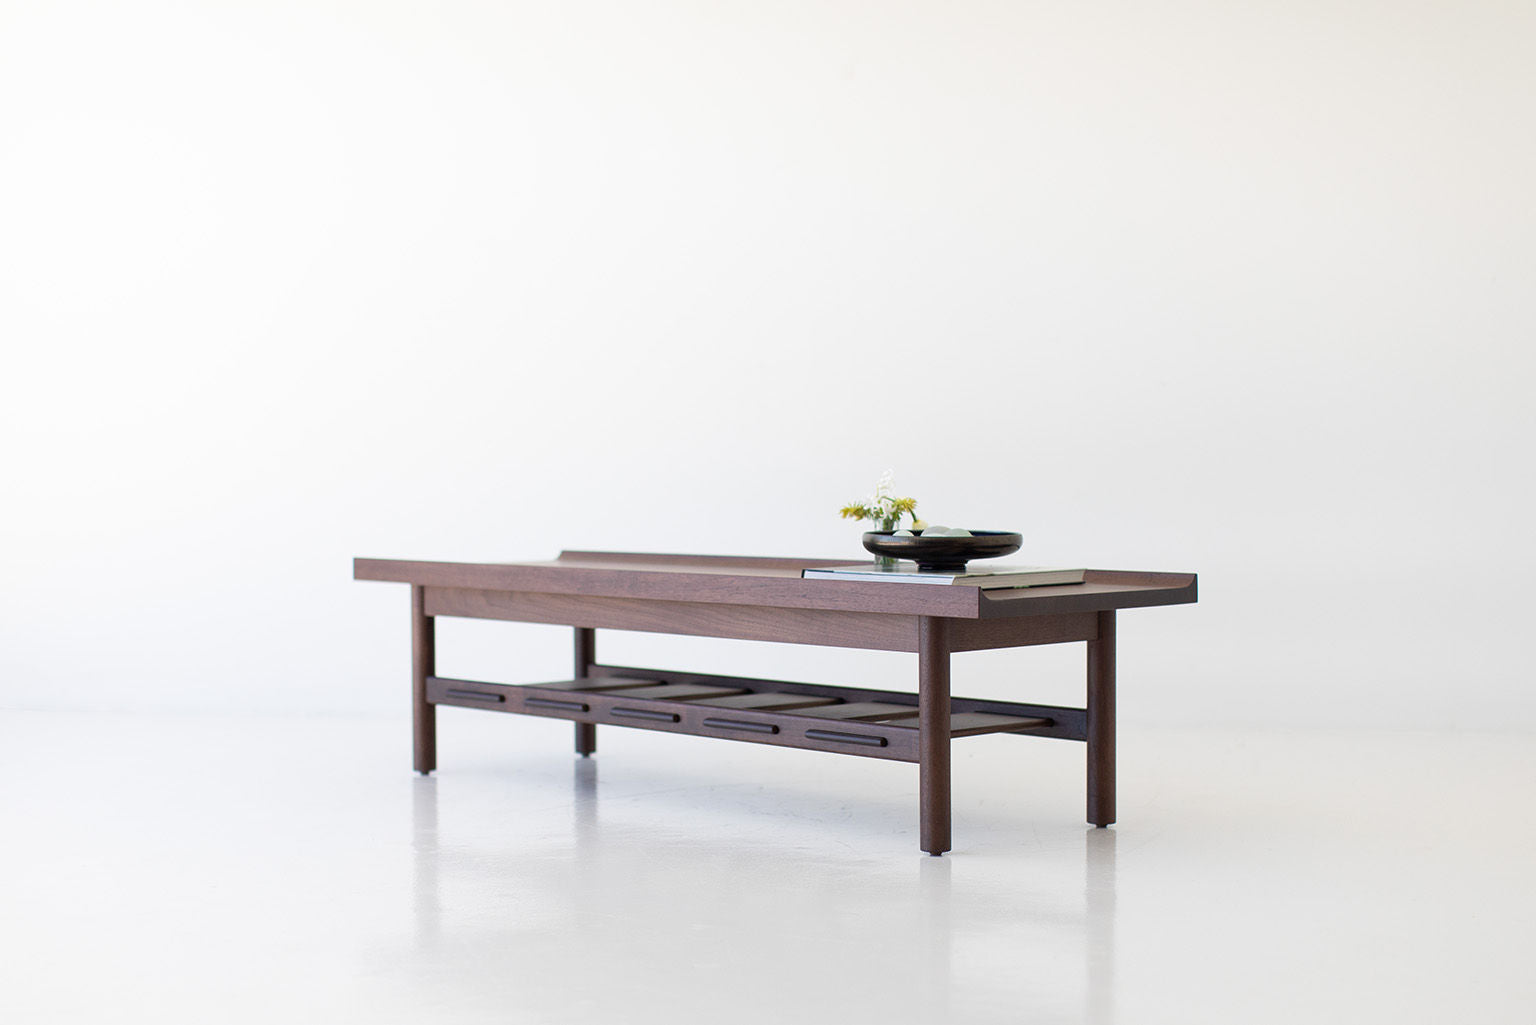 Lawrence Peabody Modern Coffee Table 2009 Craft Associates Furniture, Image 09